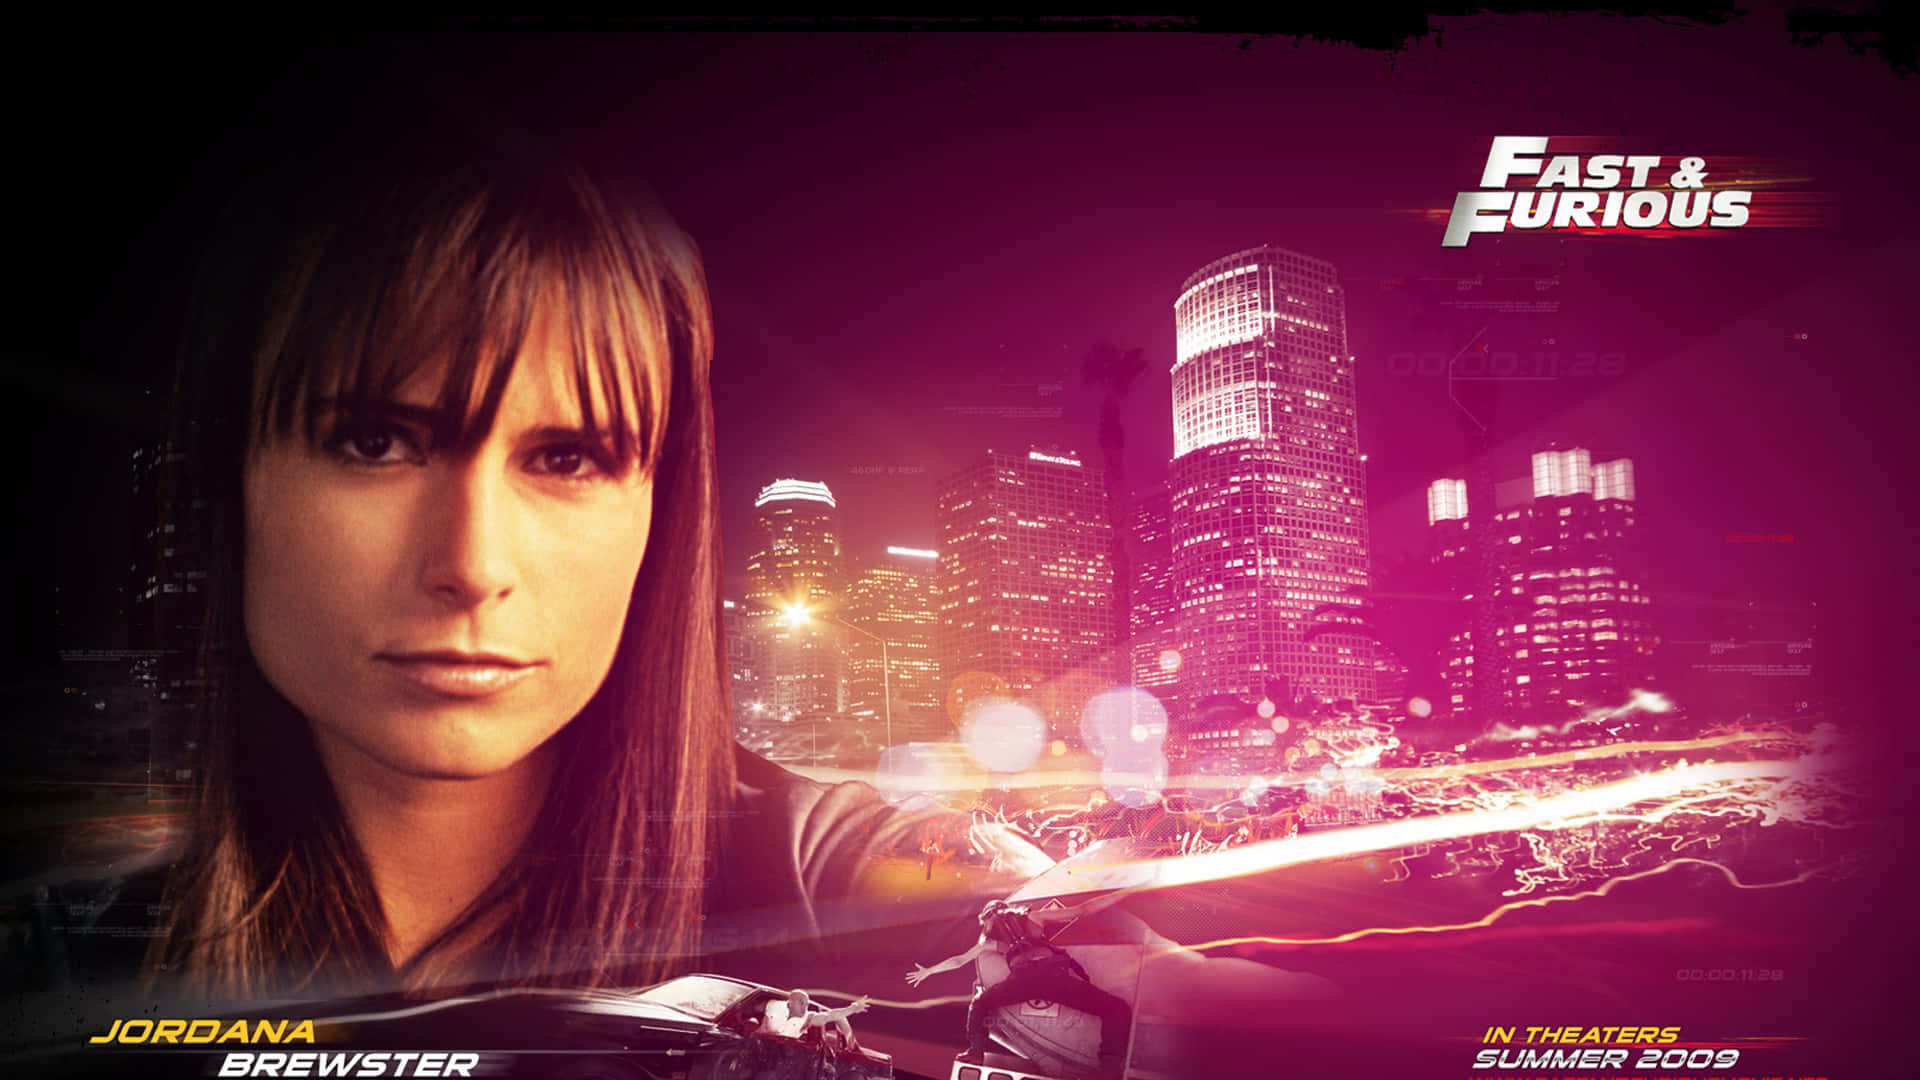 Fast And Furious 1 With Jordana Brewster Wallpaper